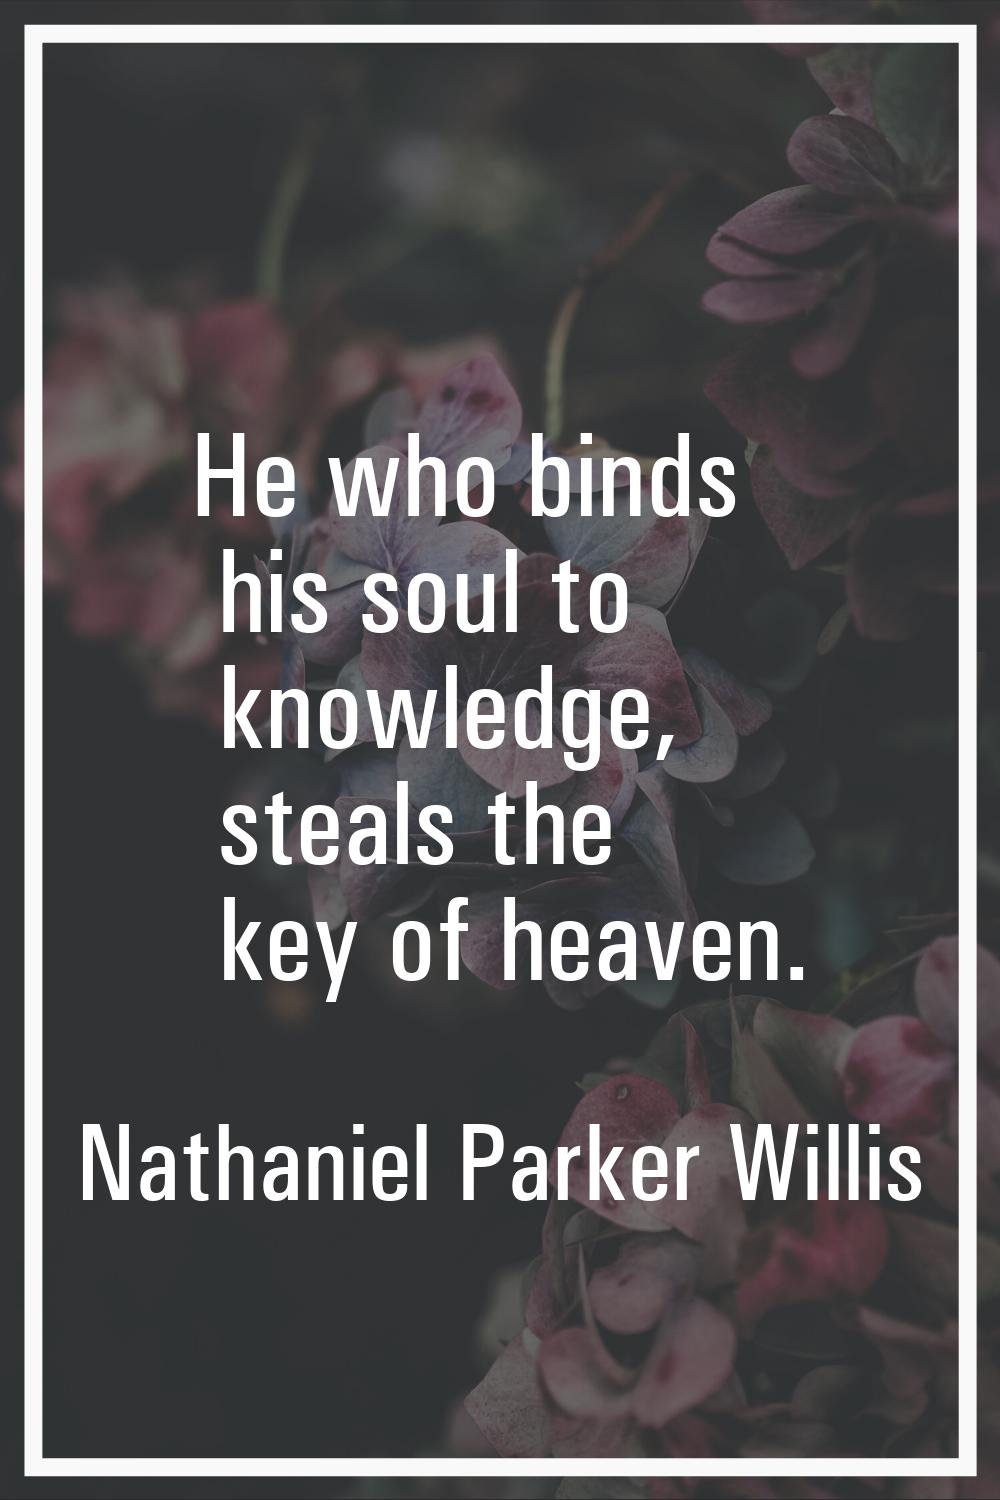 He who binds his soul to knowledge, steals the key of heaven.